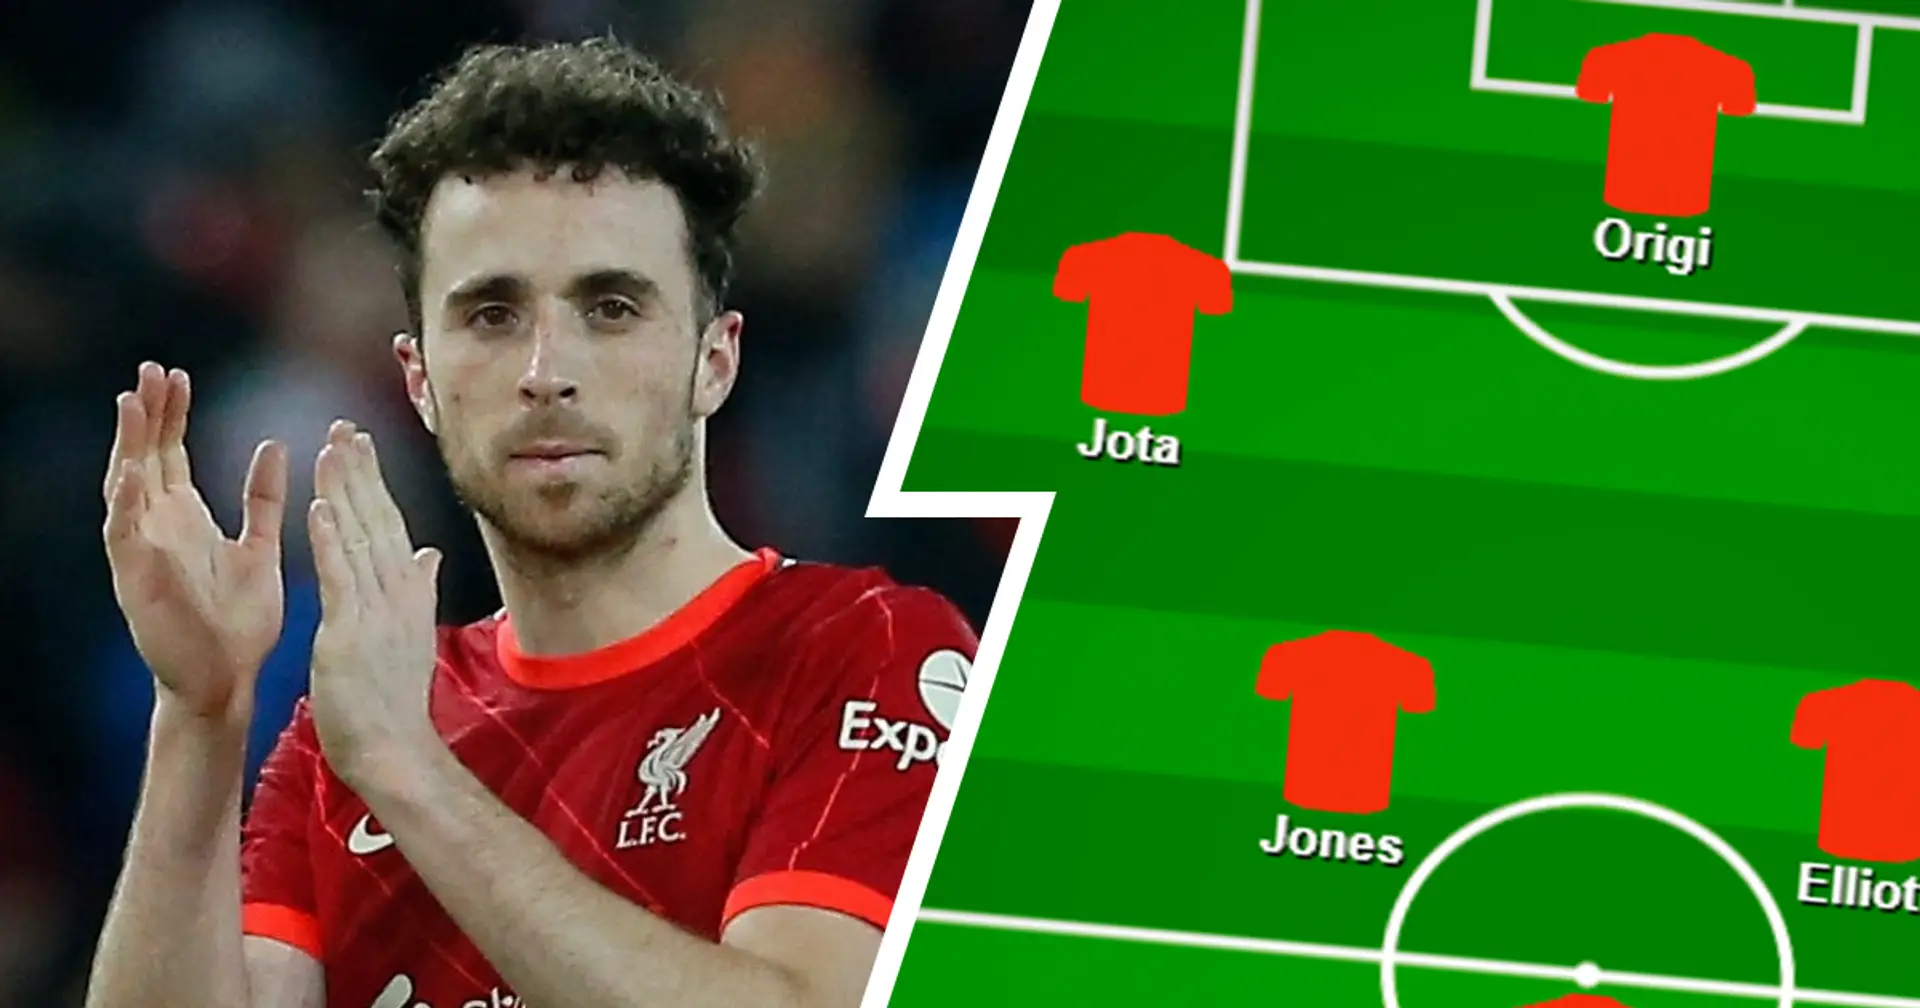 Jota to start? Select your favourite Liverpool XI vs Norwich from 2 options